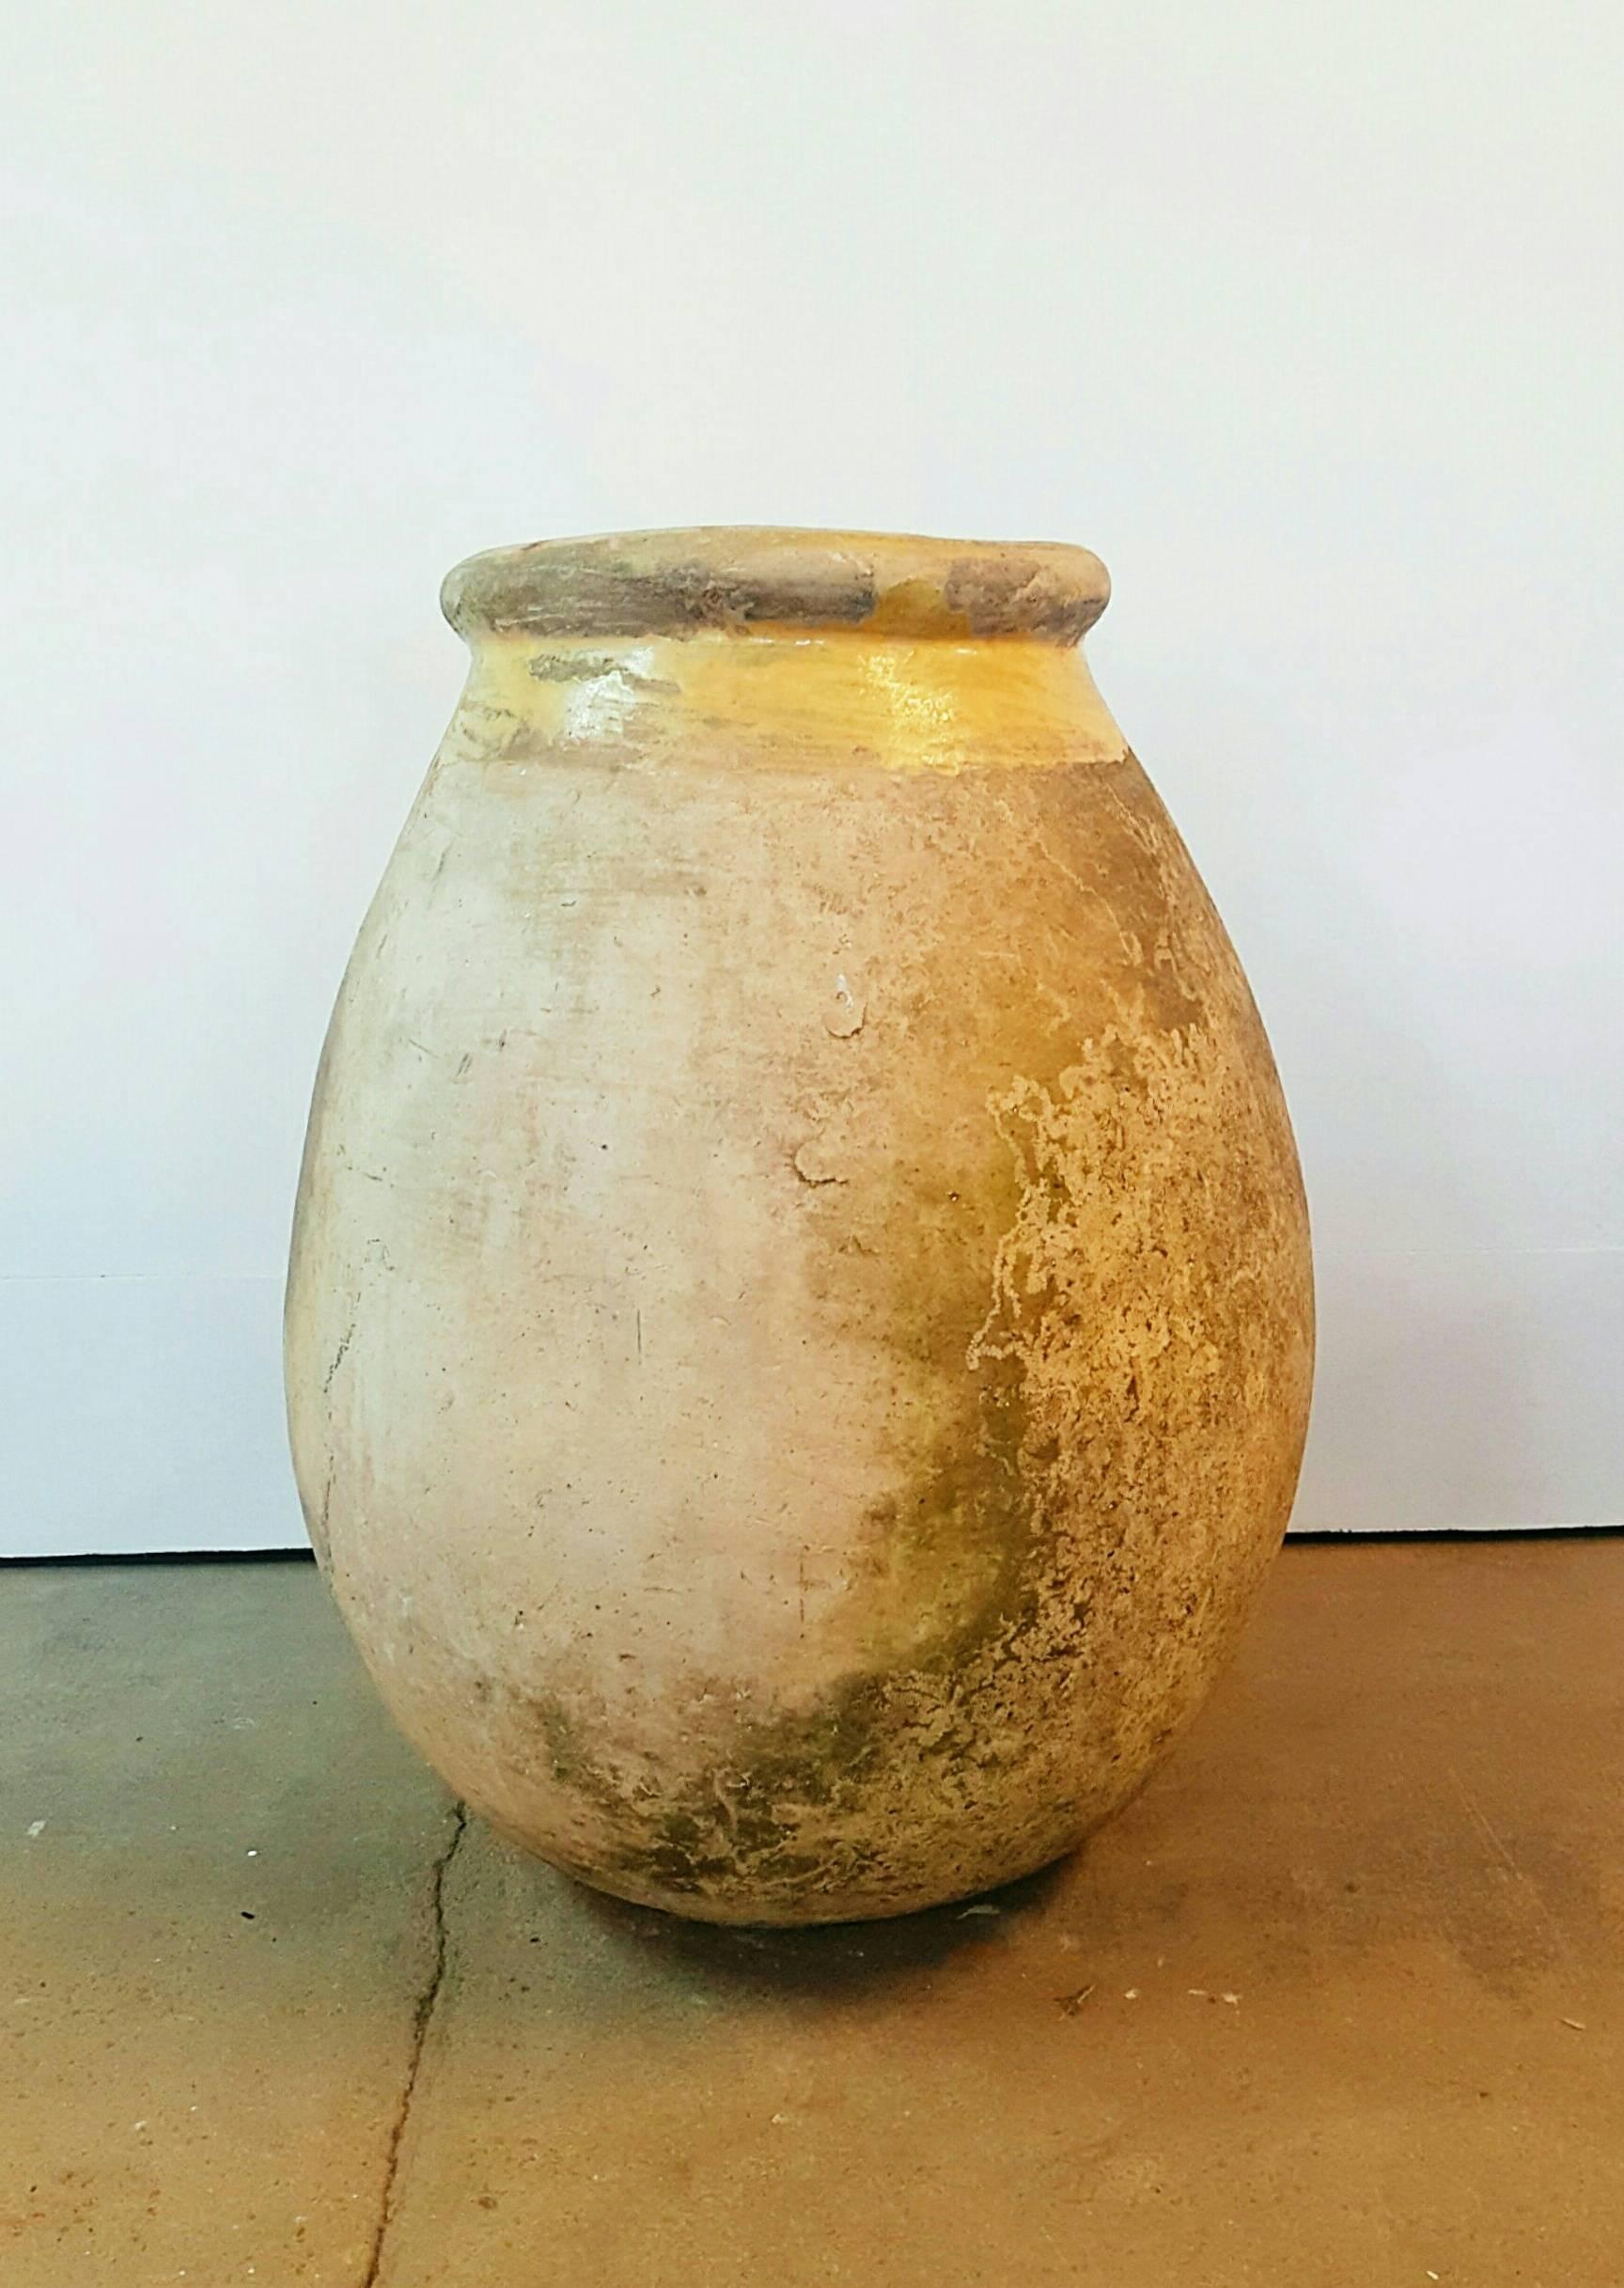 A French Provincial Biot jar from the 18th century, made of terracotta with a yellow glazed rim. Biot is a small village located in the center of the Côte d'Azur, between Nice and Cannes and is often considered a paradise for the French art de